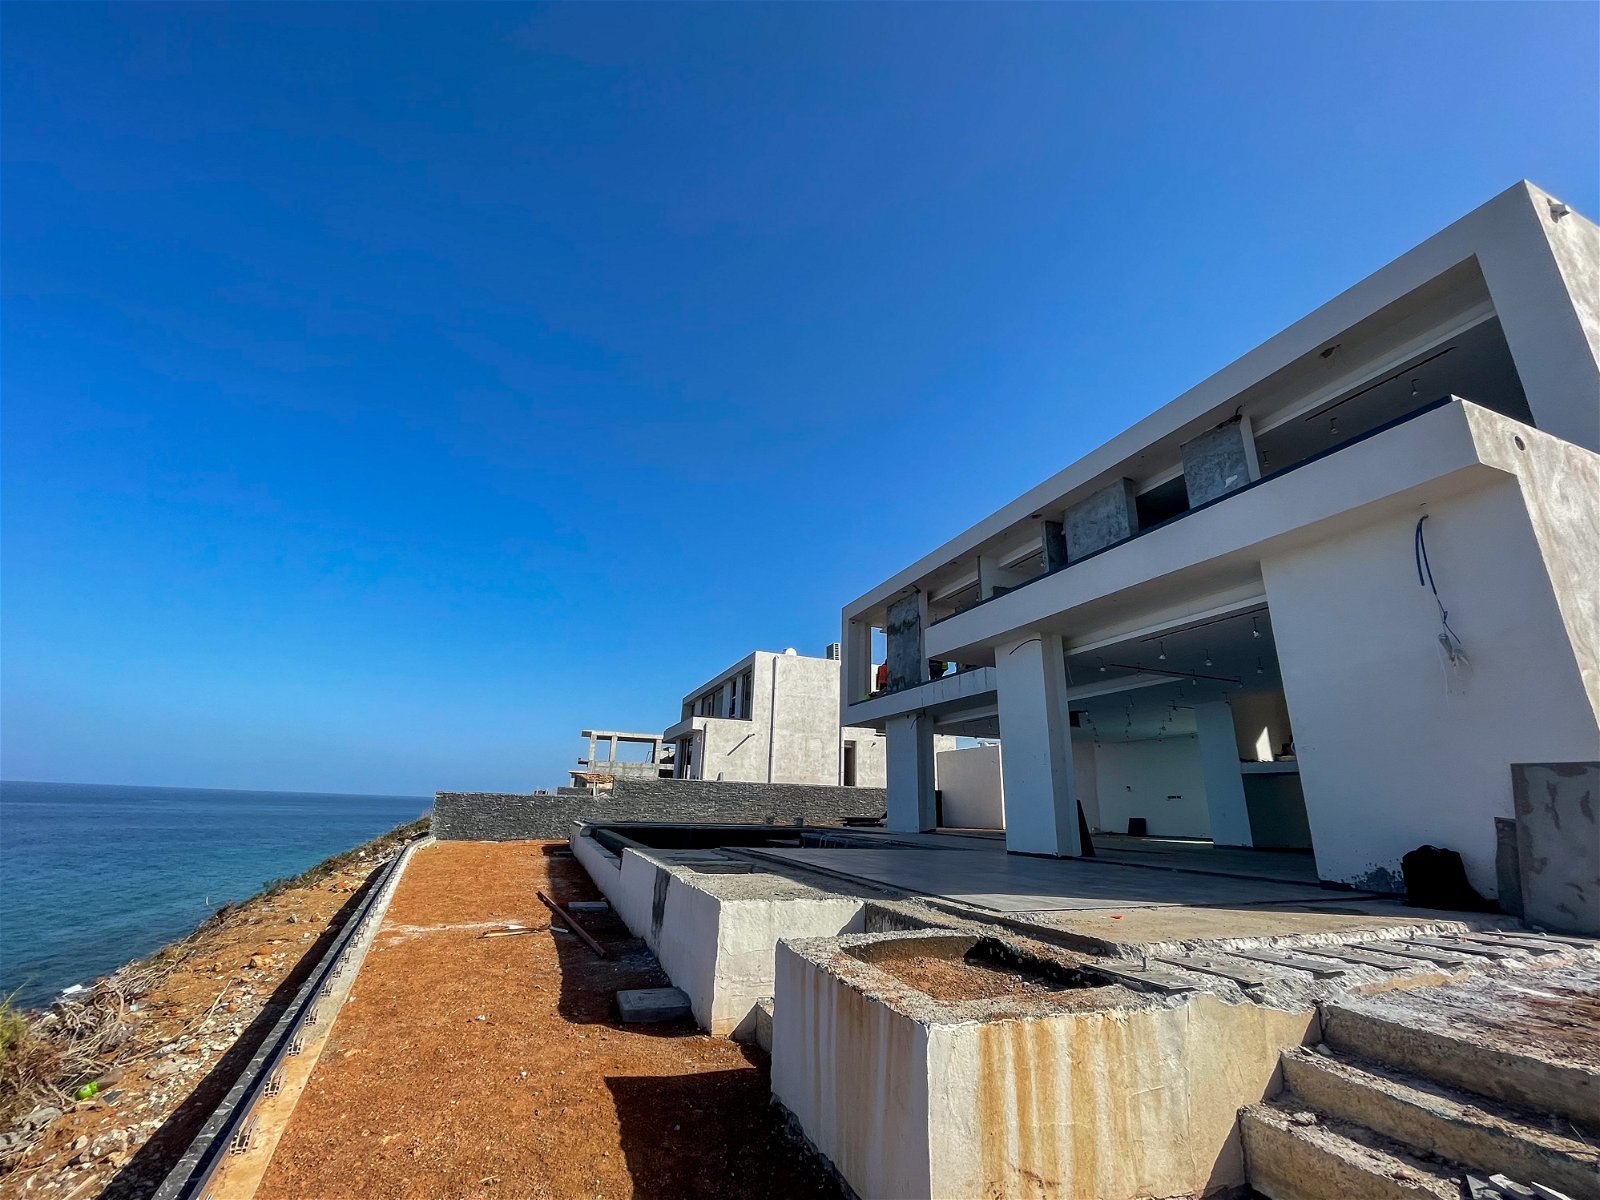 Luxury Seafront Villa in Esentepe with 5 Bedrooms-7fec0acf-bb61-4c07-8388-4155d0cef0f2